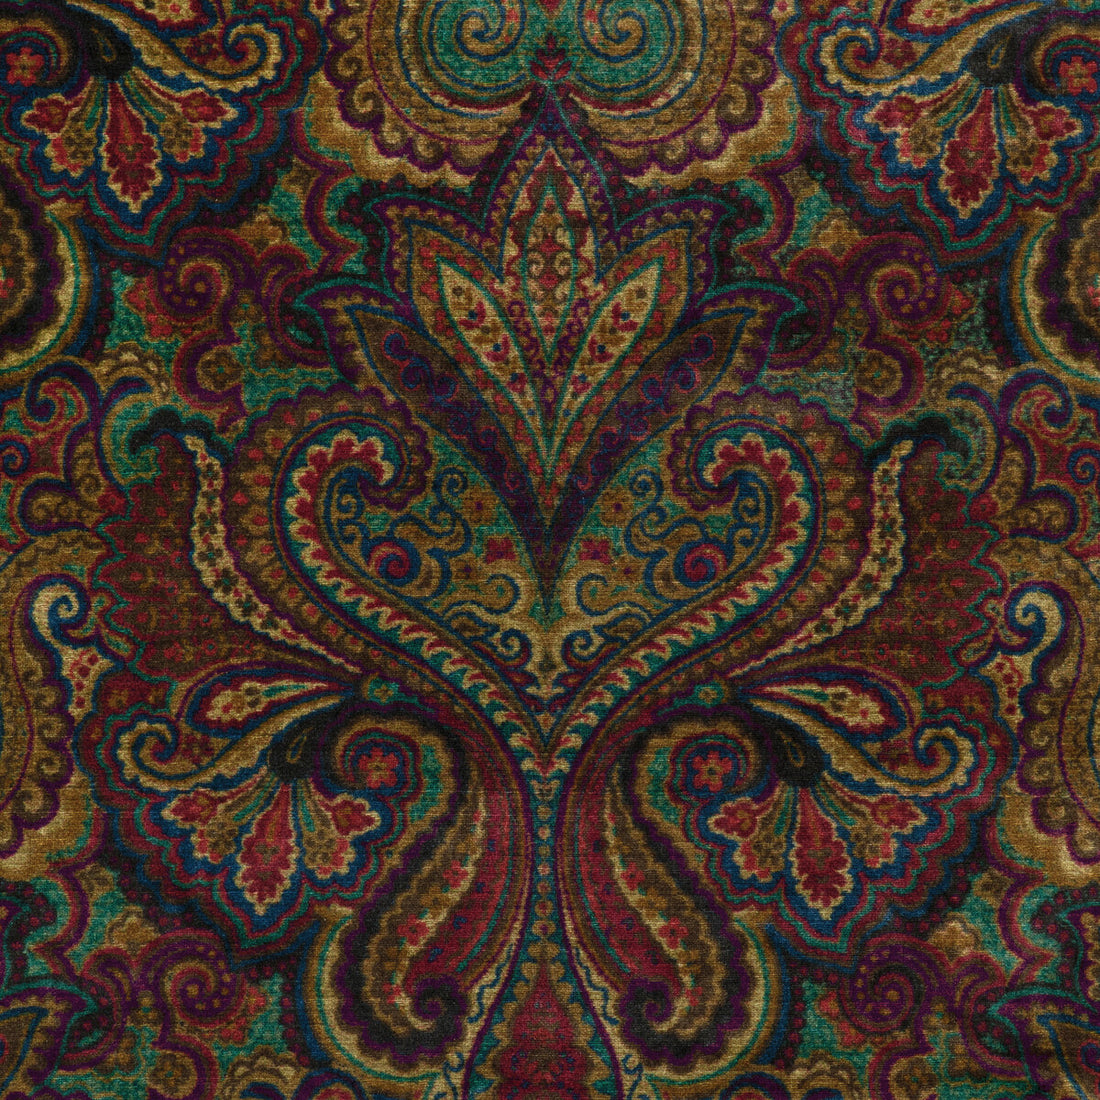 Carswell Velvet fabric in topaz/ruby color - pattern 2023113.195.0 - by Lee Jofa in the Barwick Velvets collection